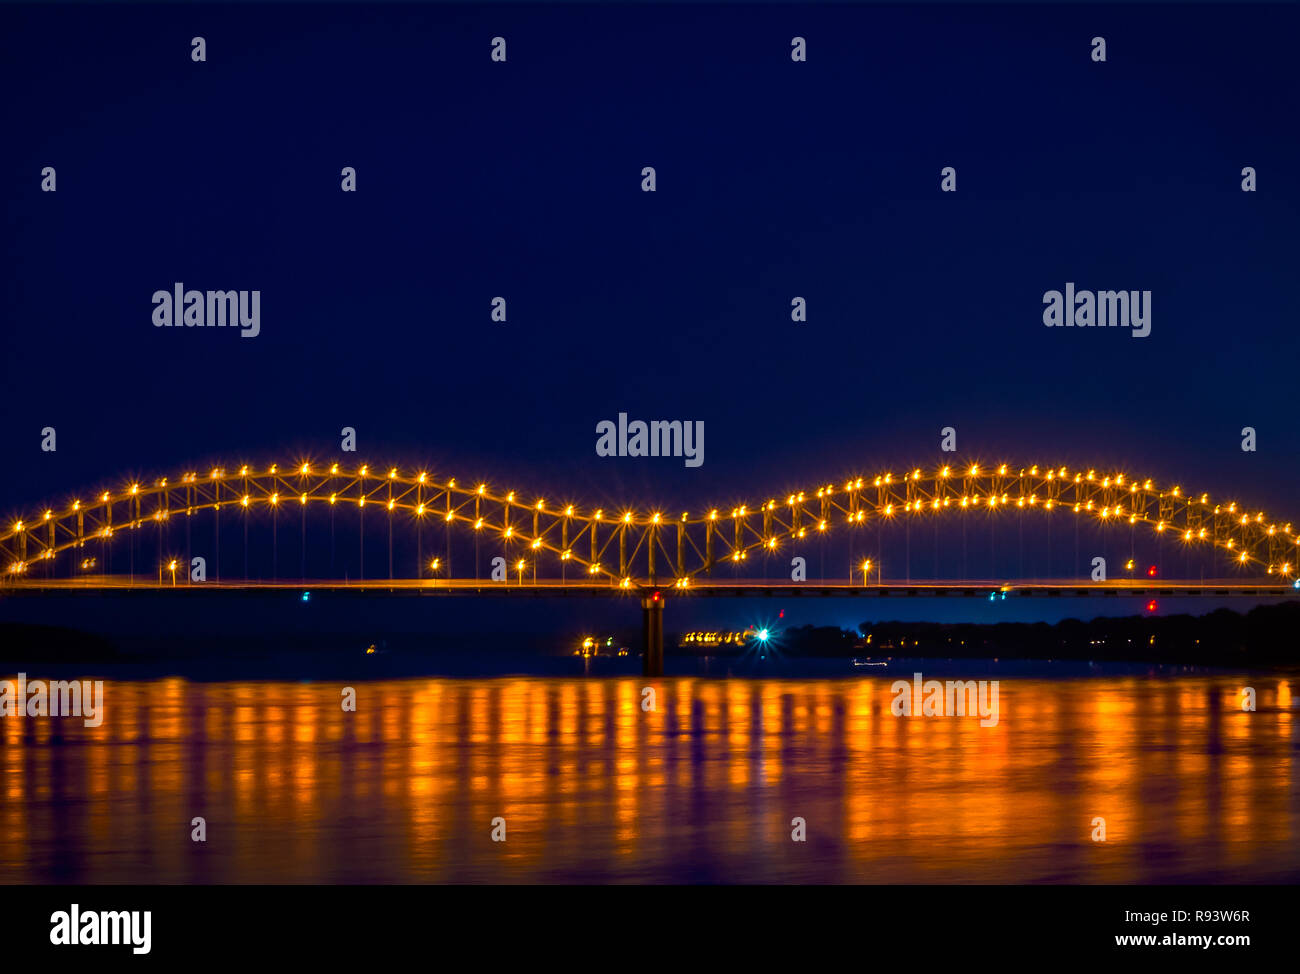 The Hernando de Soto Bridge, also called the M Bridge, is pictured at night, Sept. 5, 2015, in Memphis, Tennessee. Stock Photo